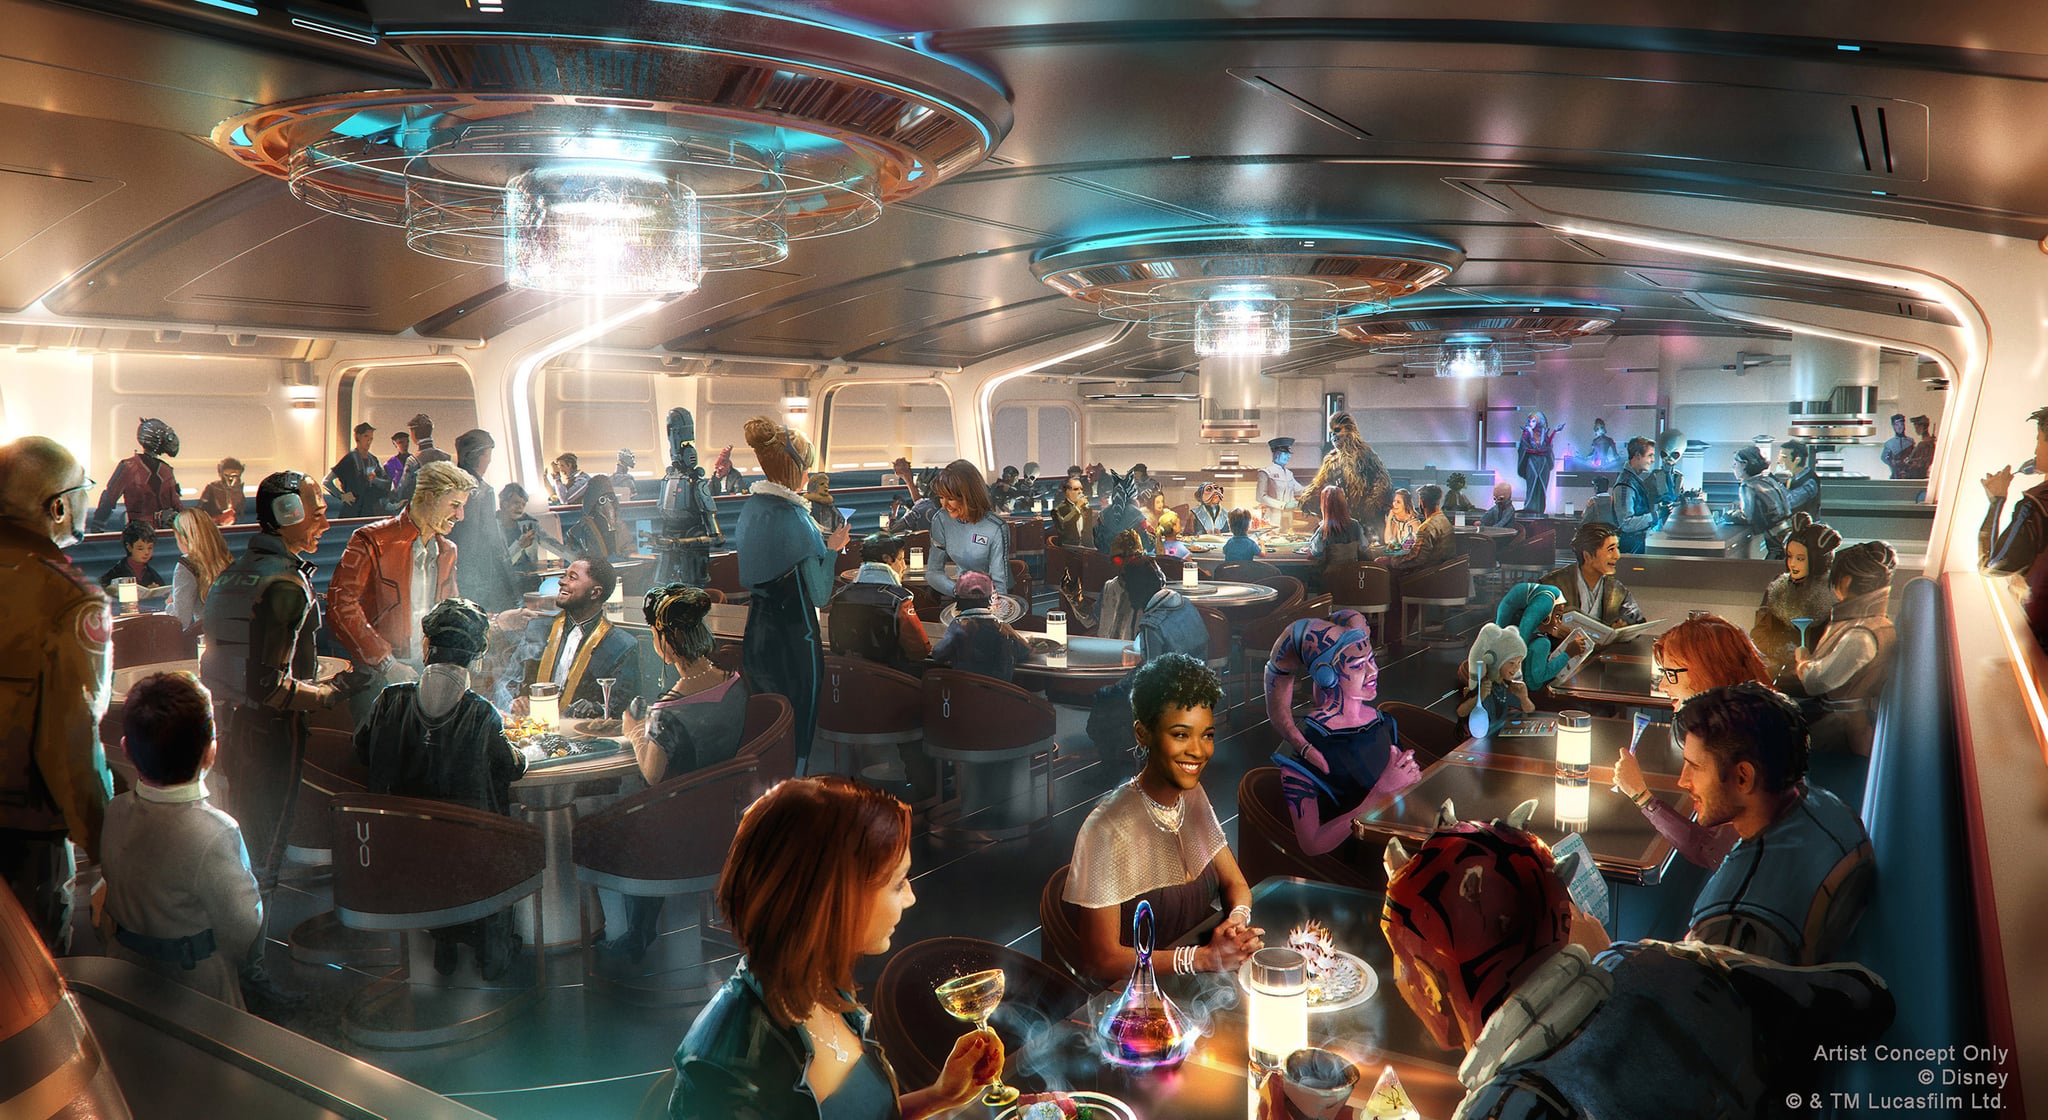 This artist concept rendering does not represent current operational guidelines or health and safety measures such as face covering and physical distancing requirements. Guests experiencing Star Wars: Galactic Starcruiser – opening in 2022 at Walt Disney World Resort in Lake Buena Vista, Fla. – will have fantastic meals in the Crown of Corellia Dining Room, seen in this artist concept rendering. The enticing supper club is a bright and welcoming hall offering menus of both otherworldly and familiar origins. One night's dinner will feature a live performance from a galactic superstar. (Disney/Lucasfilm)